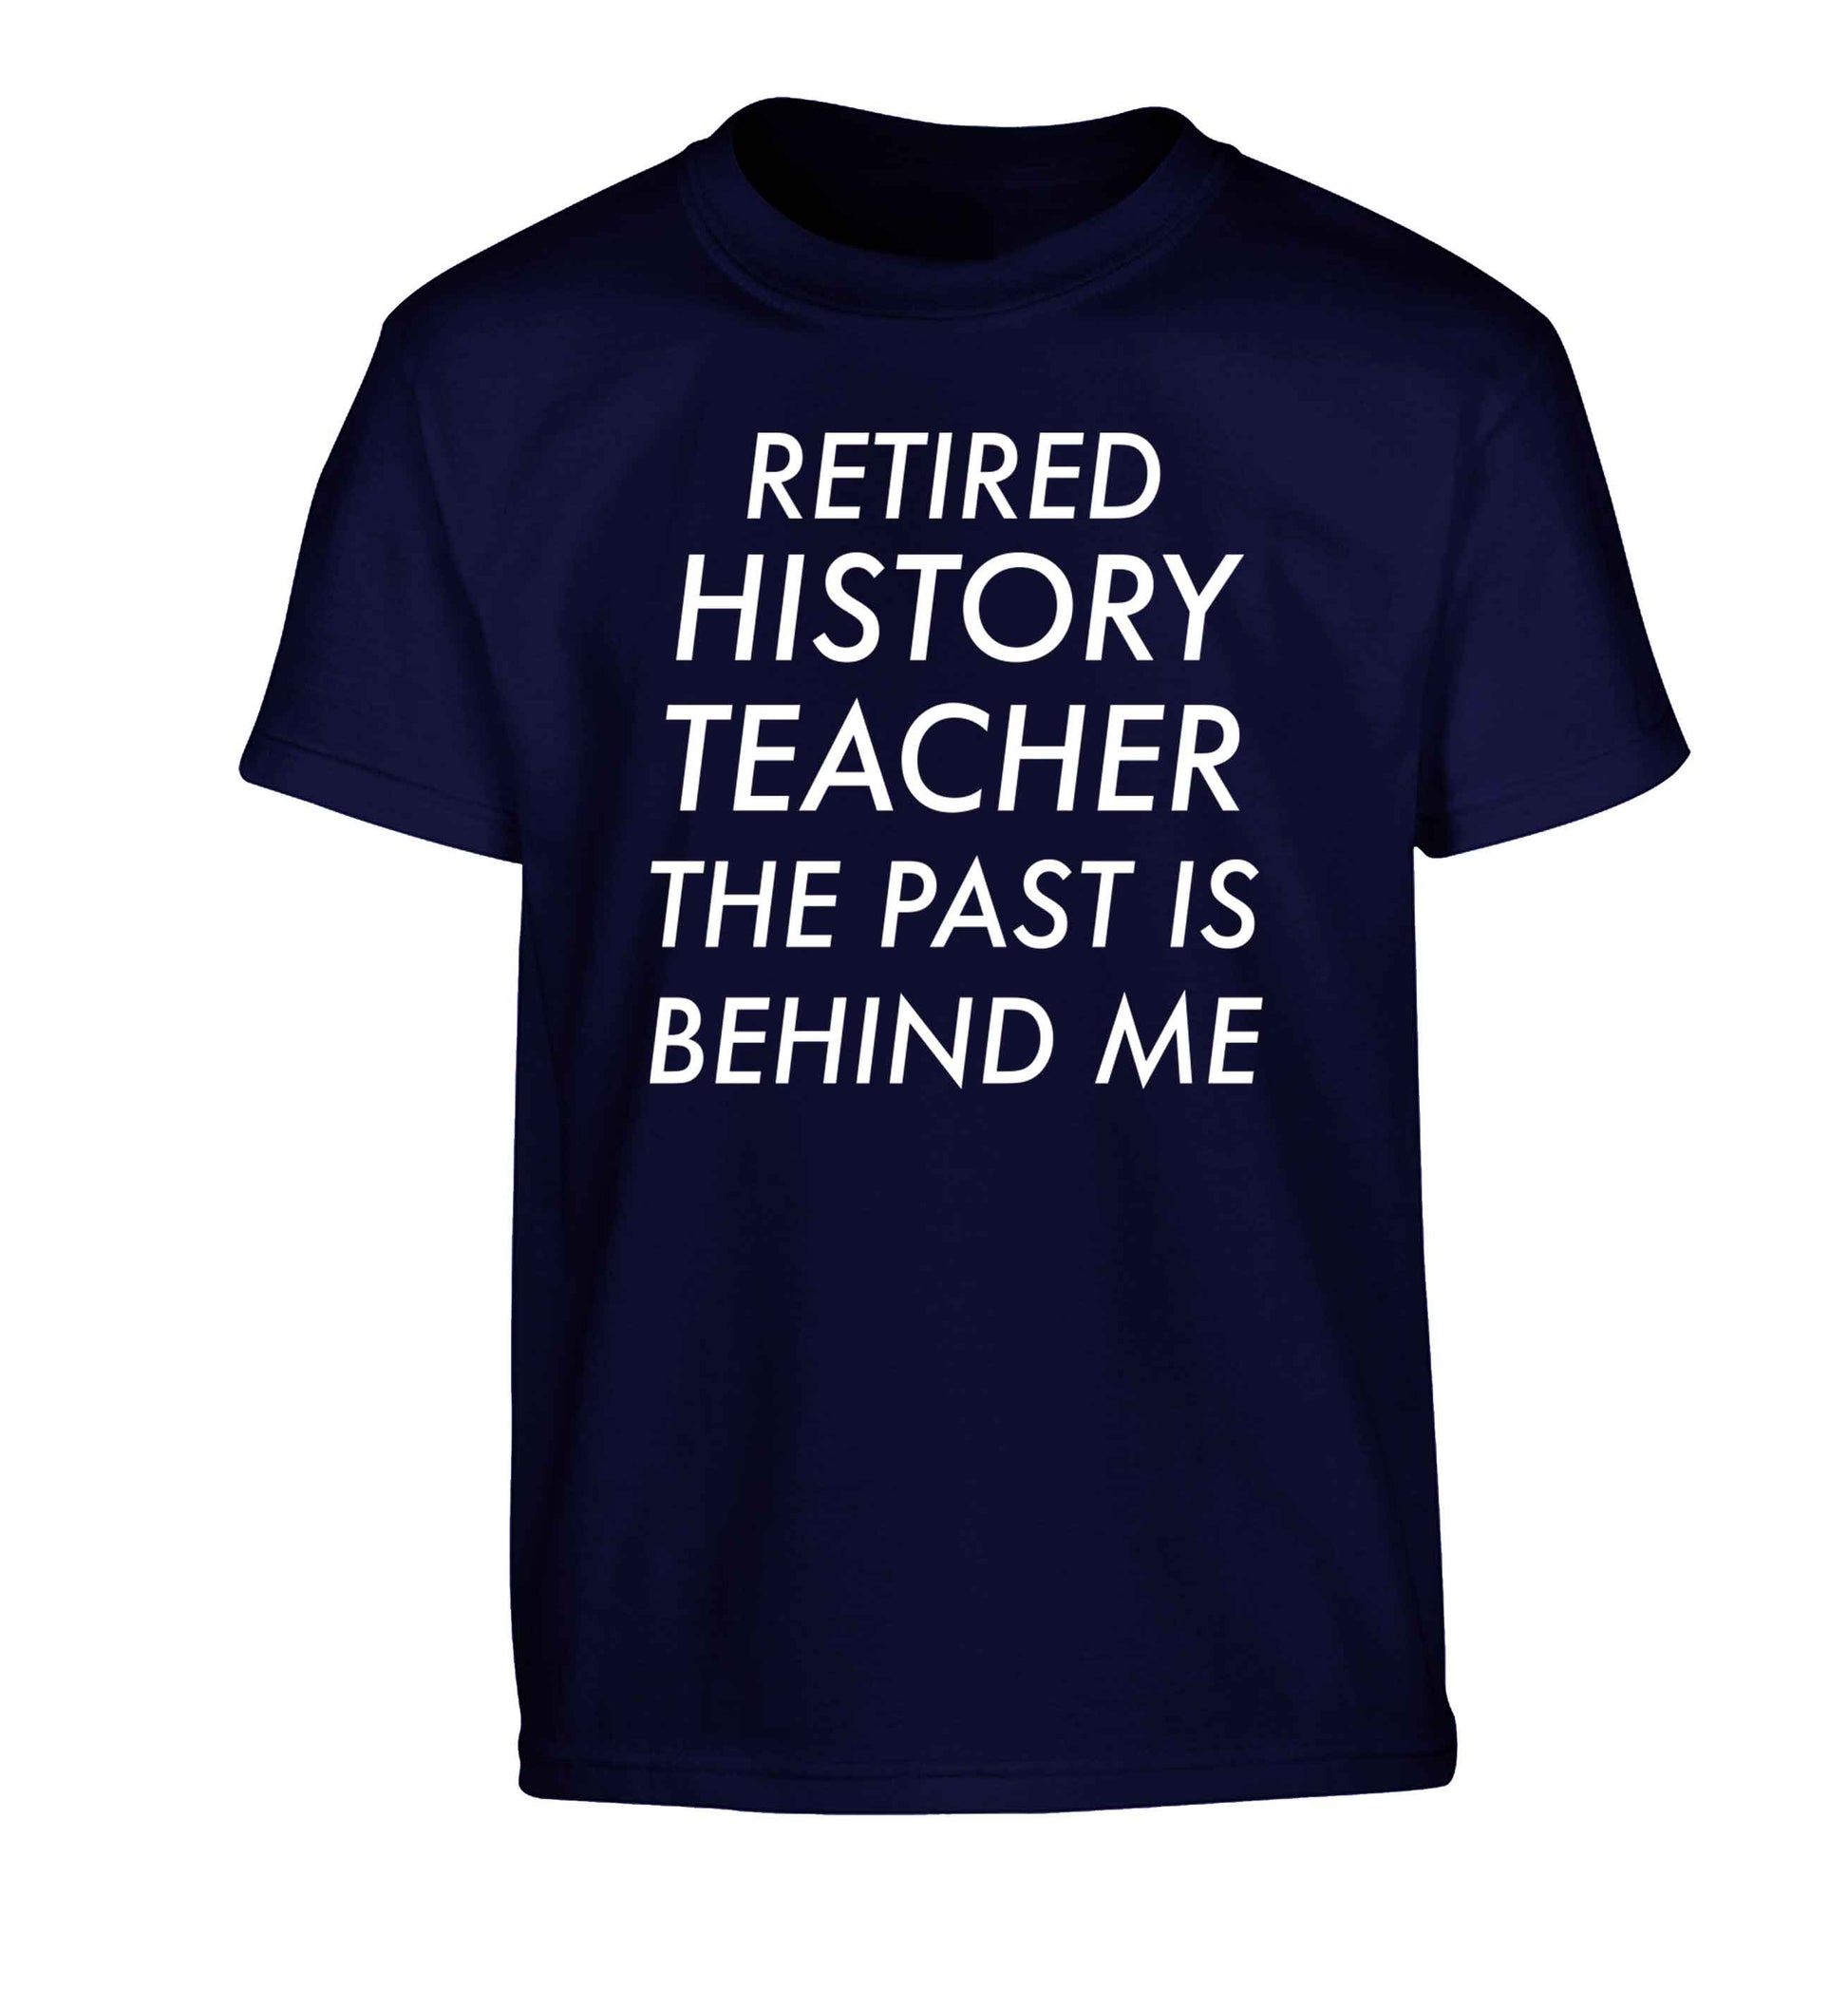 Retired history teacher the past is behind me Children's navy Tshirt 12-13 Years